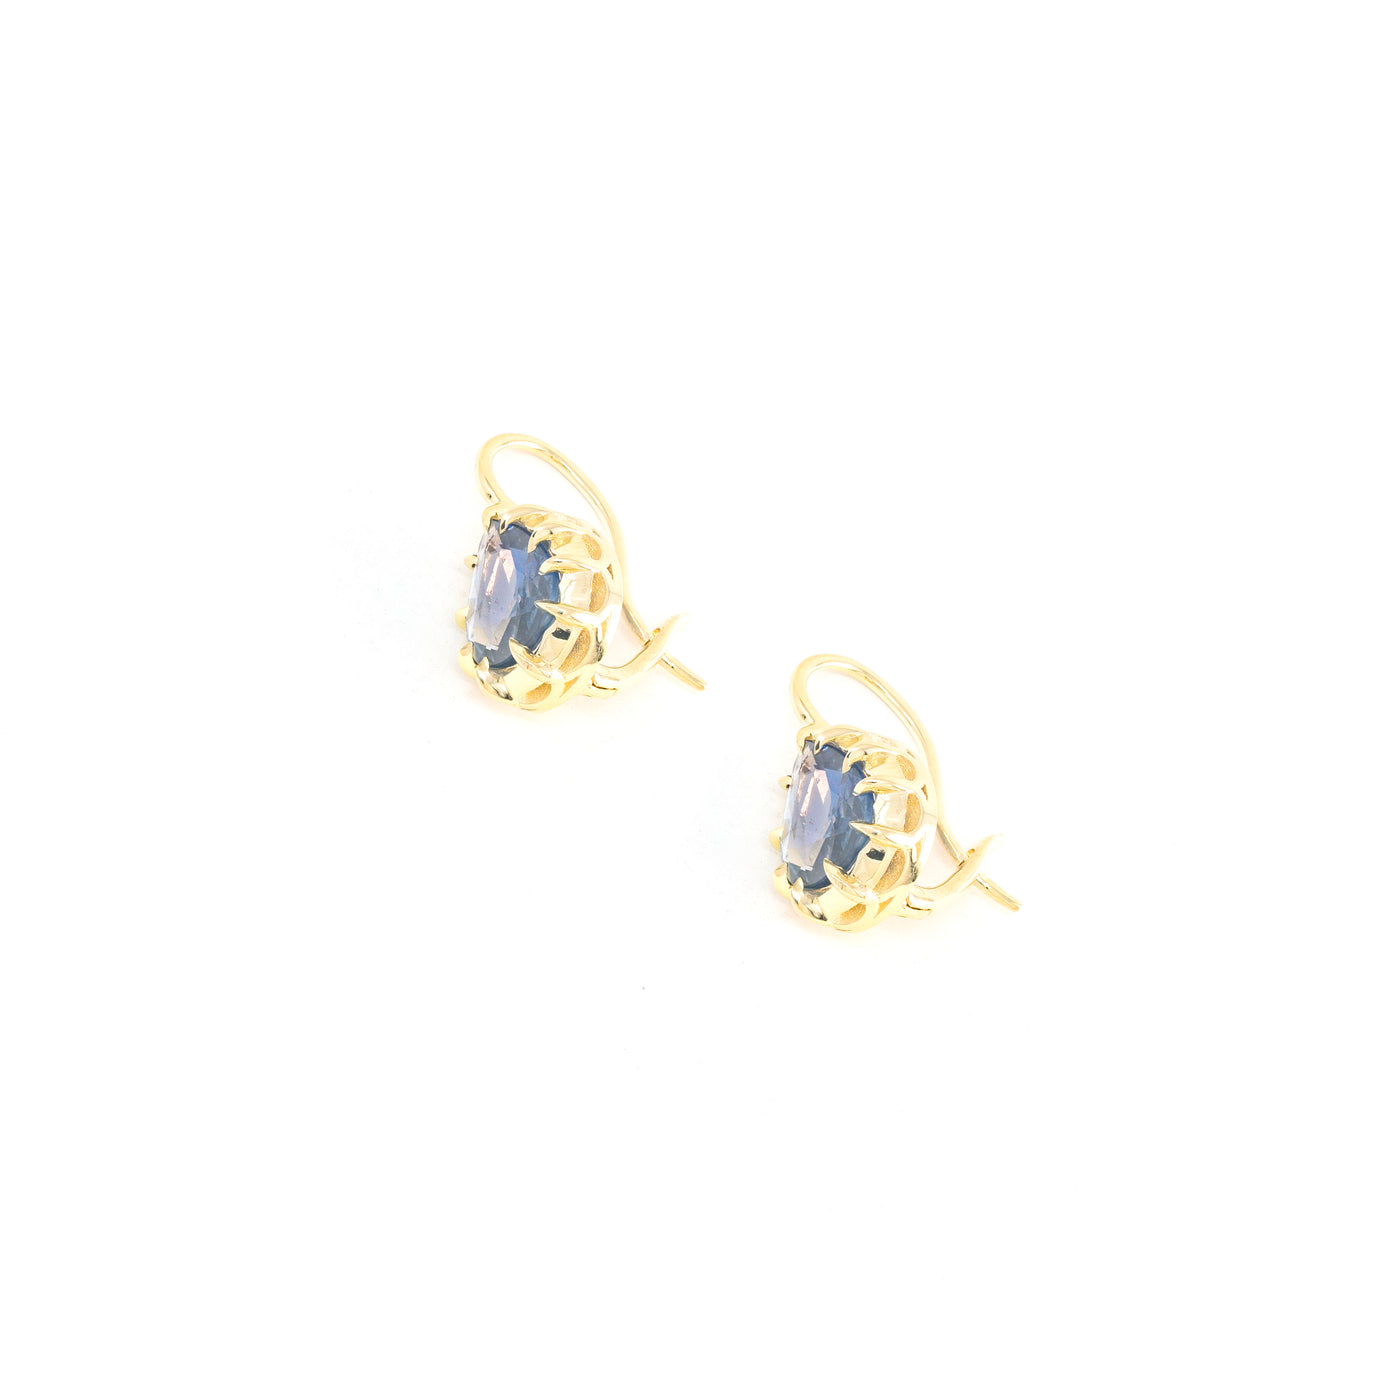 Victorian Rose Pear Shaped Blue Sapphire Drops